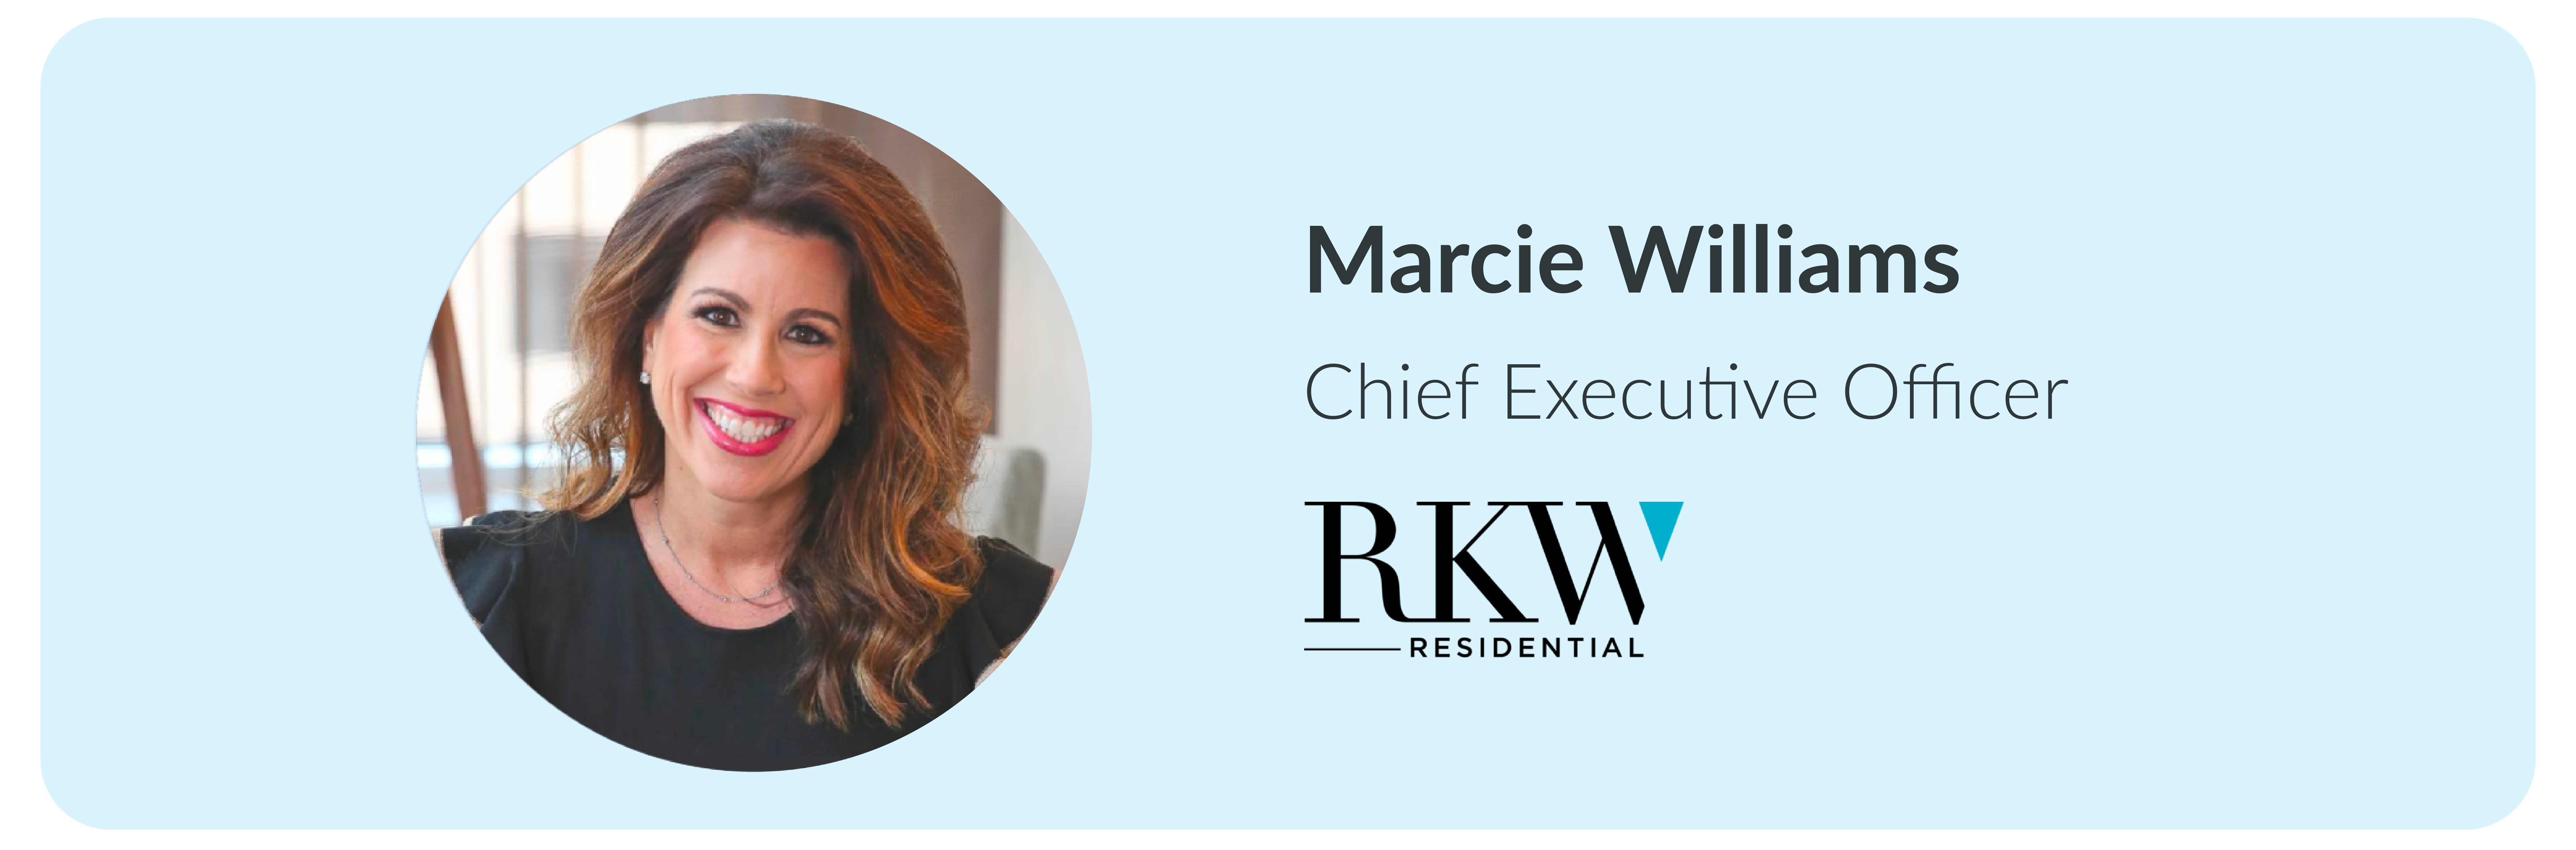 Marcie Williams - CEO at RKW